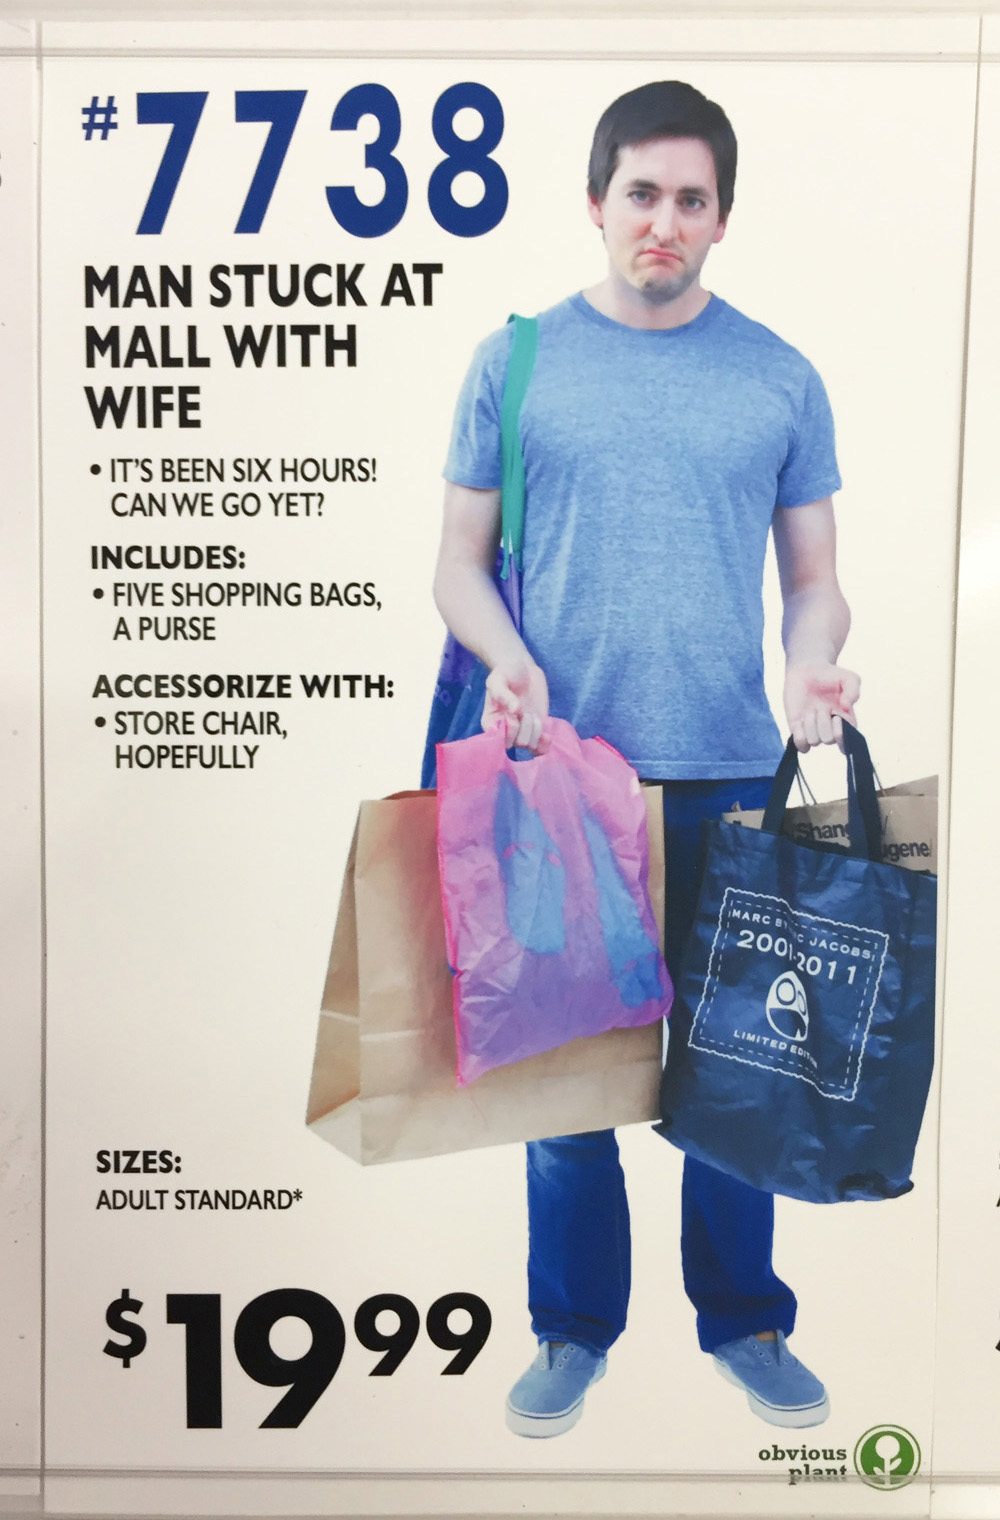 fake halloween costumes - 7738 Man Stuck At Mall With Wife It'S Been Six Hours! Can We Go Yet? Includes Five Shopping Bags, A Purse Accessorize With Store Chair, Hopefully Shang igene Marc By Jacobs i 2001.2011 Limited Edi, Sizes Adult Standard $1999 obvi